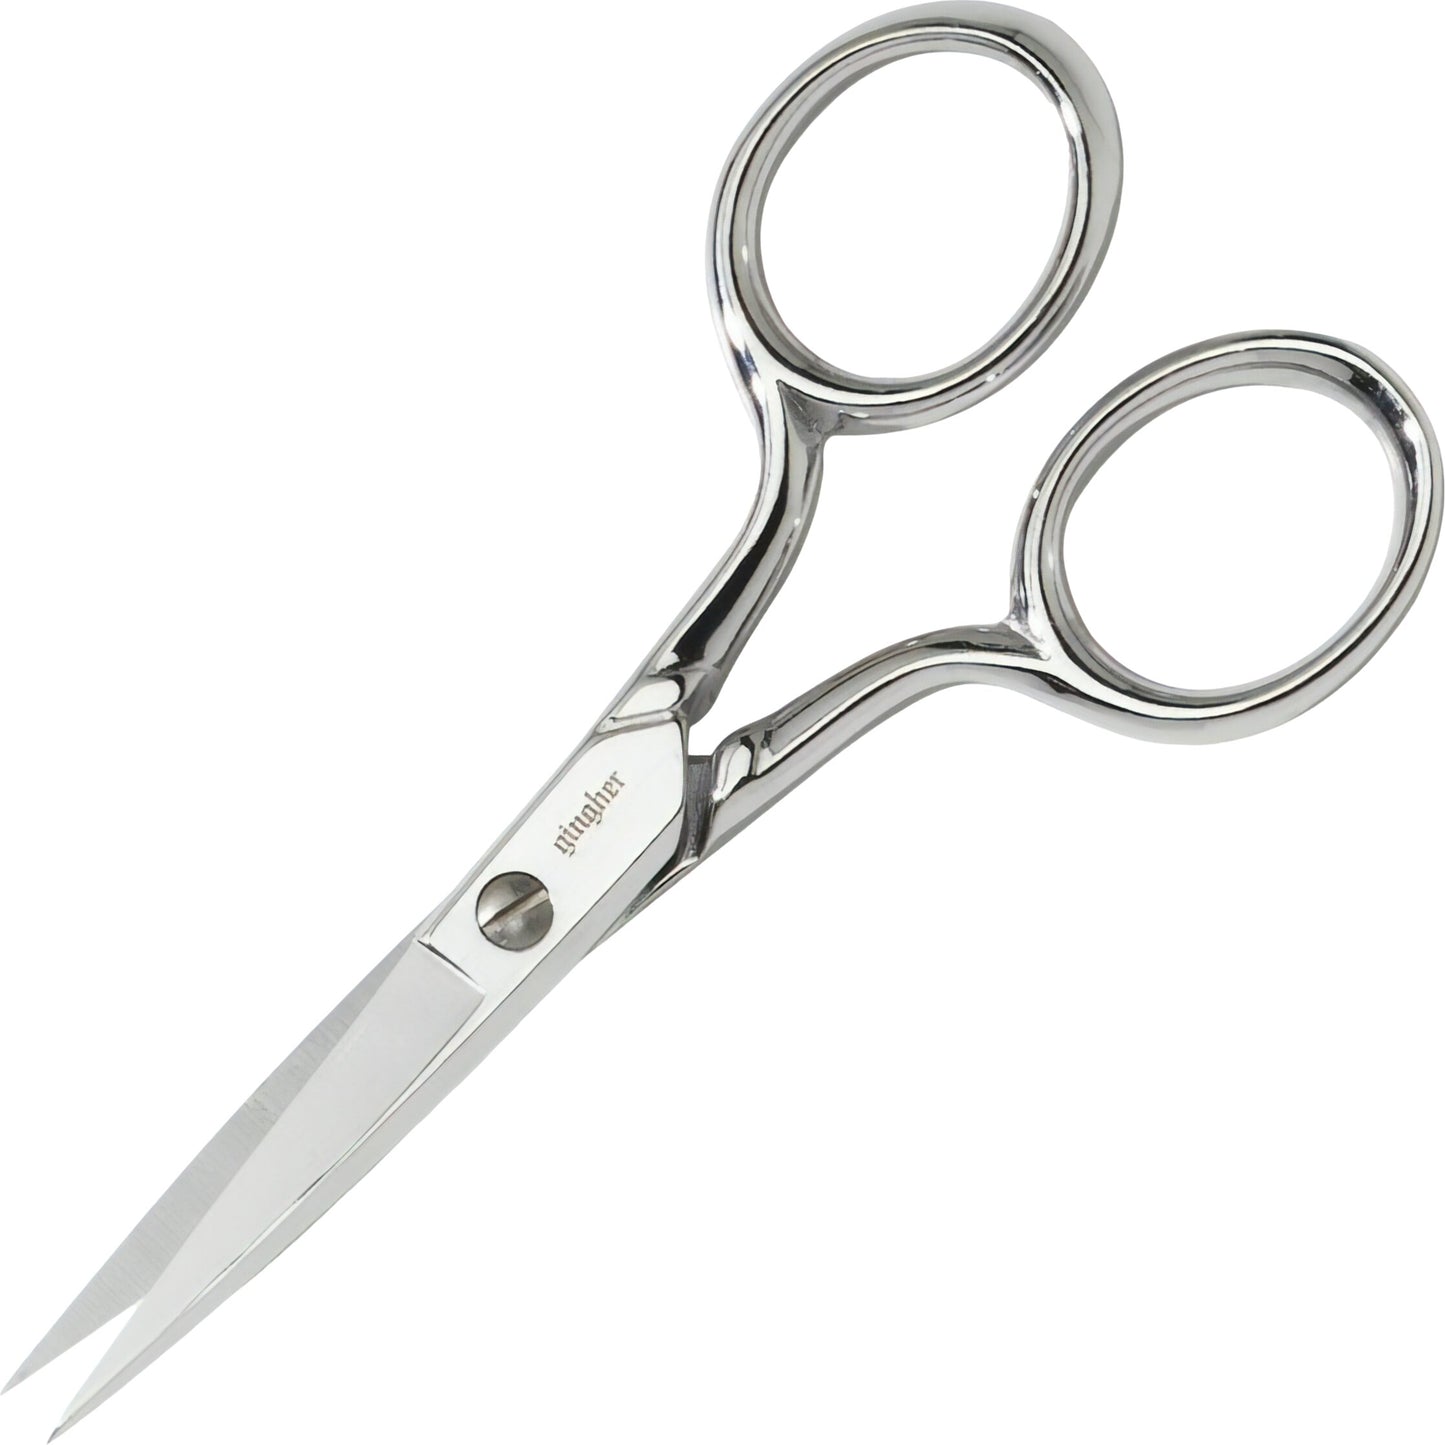 Gingher 4" Embroidery Scissors